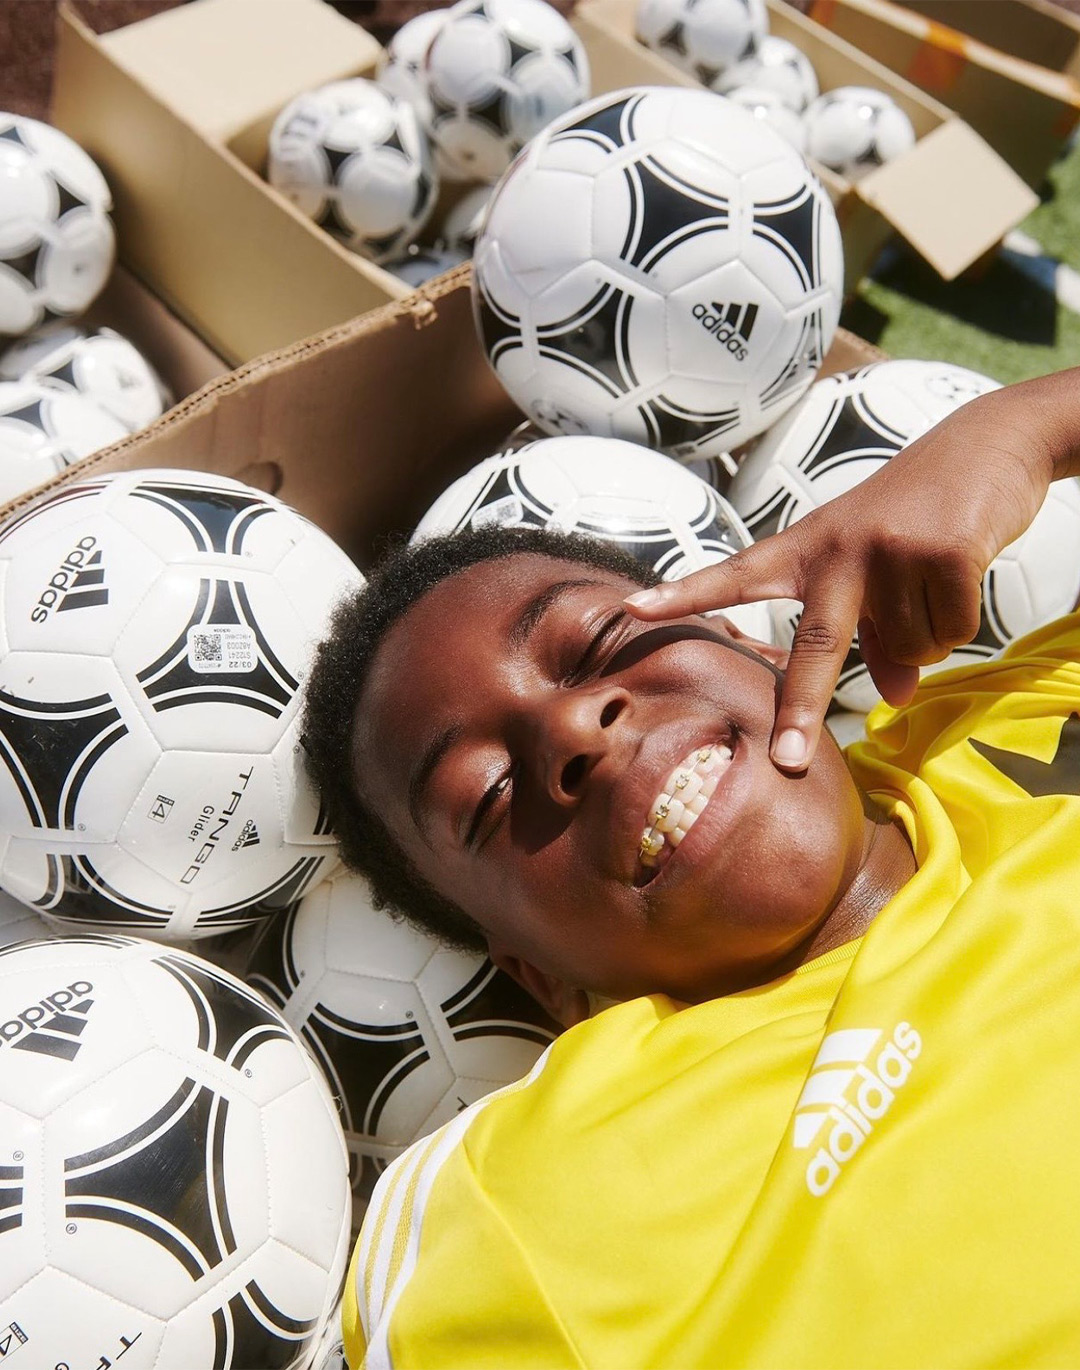 Young soccer player smiling and laying on soccer balls